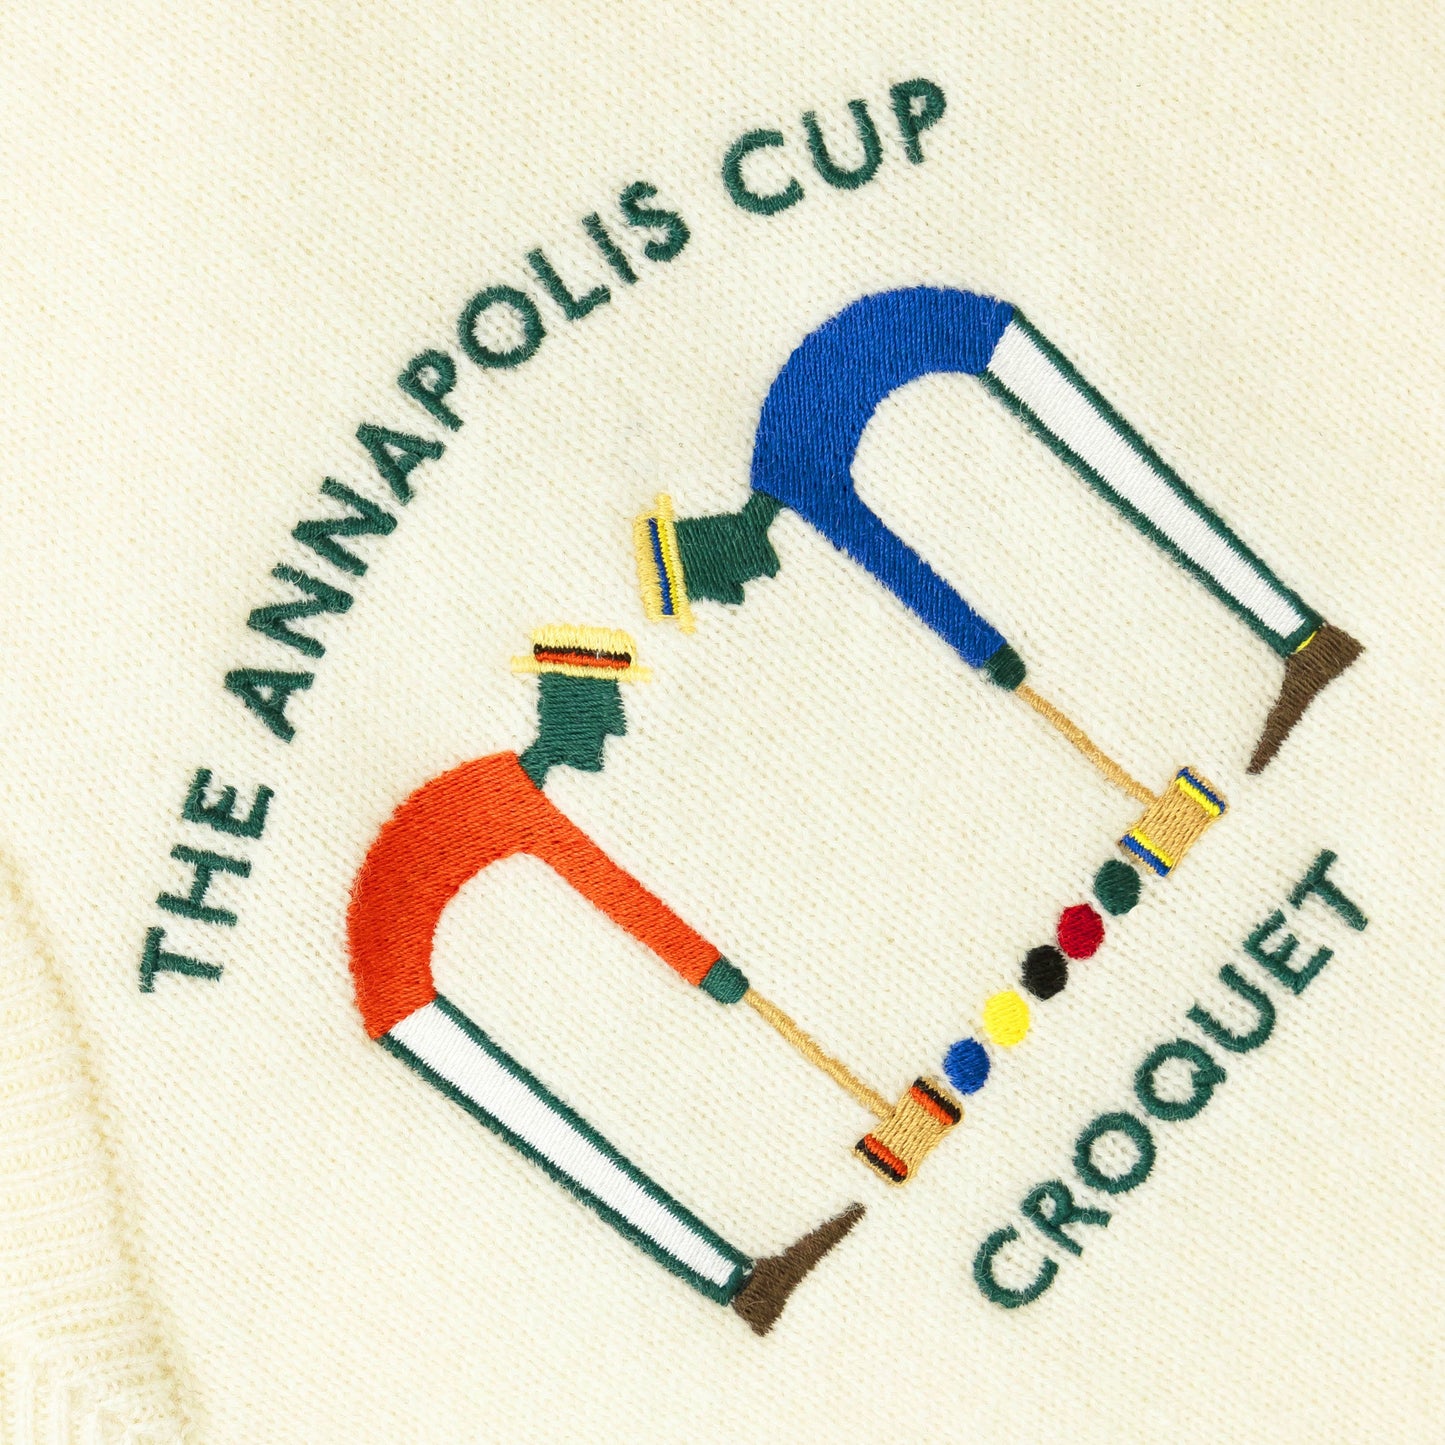 100% Lambswool Sweater (The Annapolis Cup Sweater)